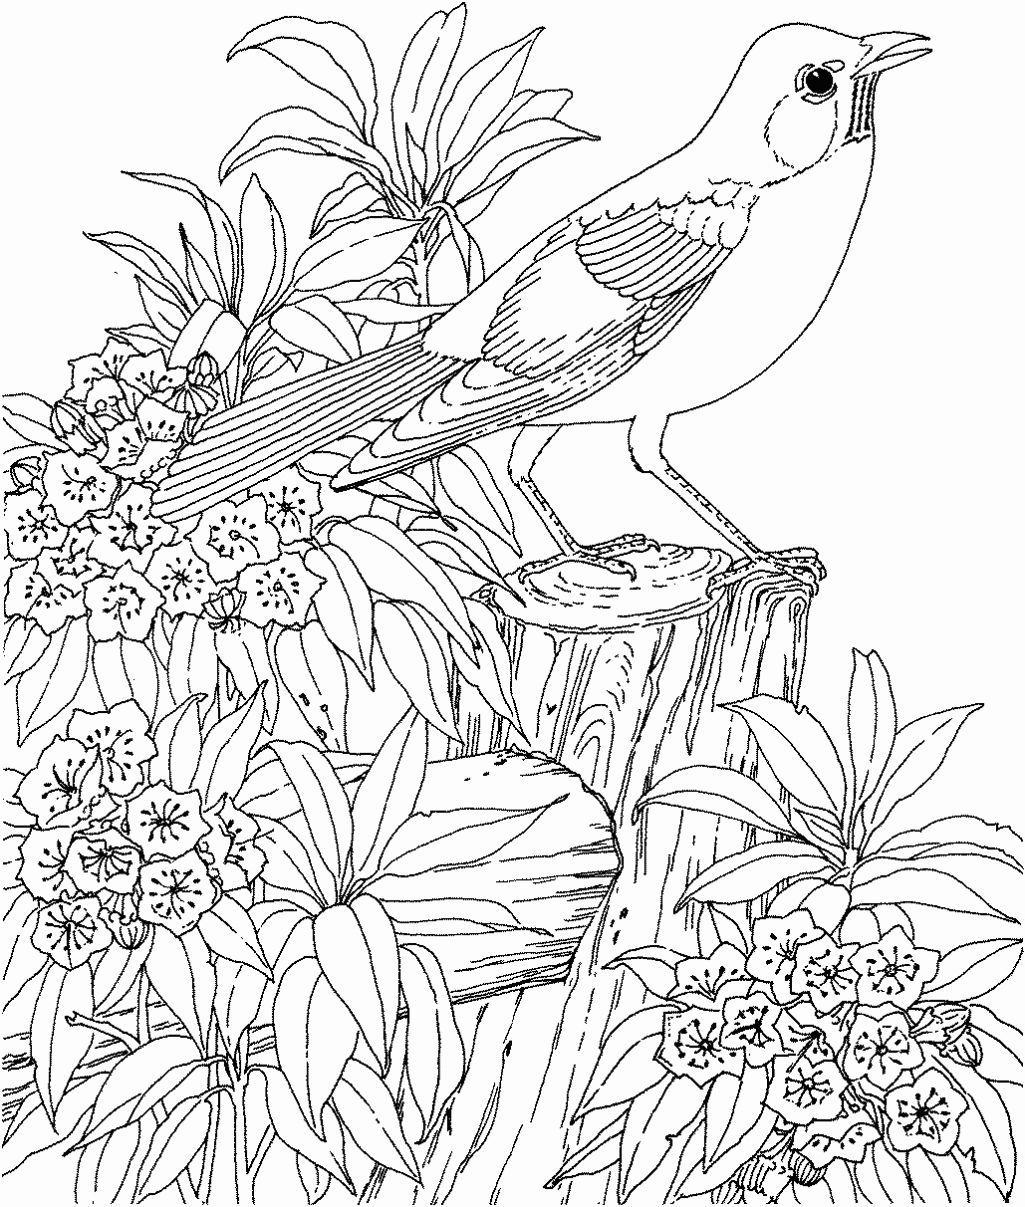 Landscape Coloring Pages   Best Coloring Pages For Kids